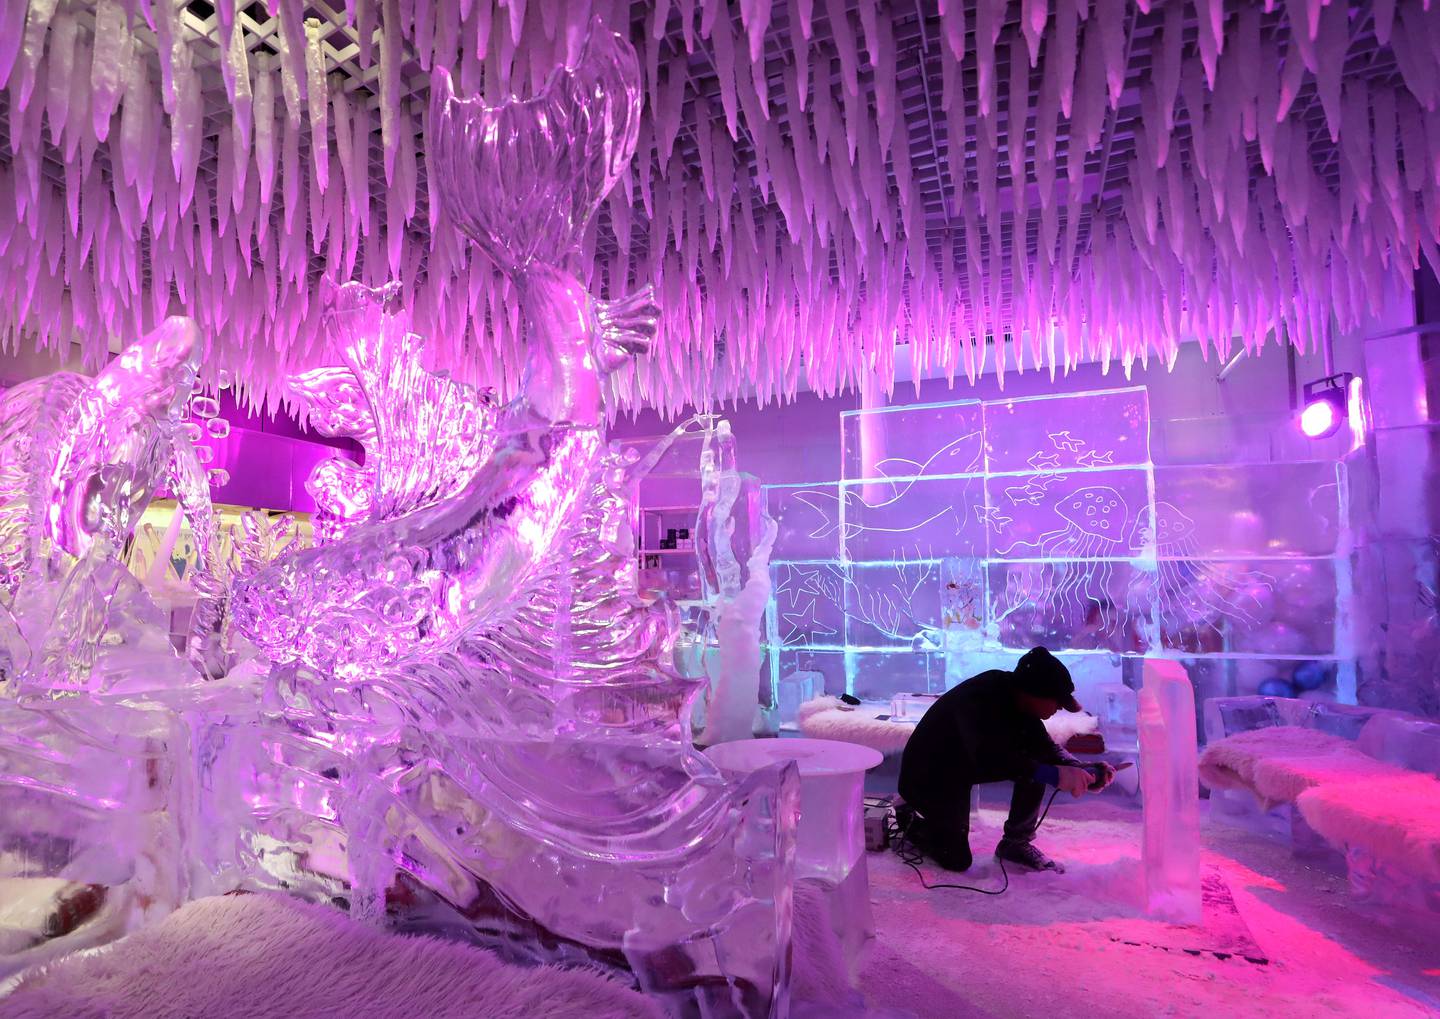 Mark Ranasinghe created ice sculptures in ice lounges in Dubai, Vietnam and Kuwait. Chris Whiteoak / The National